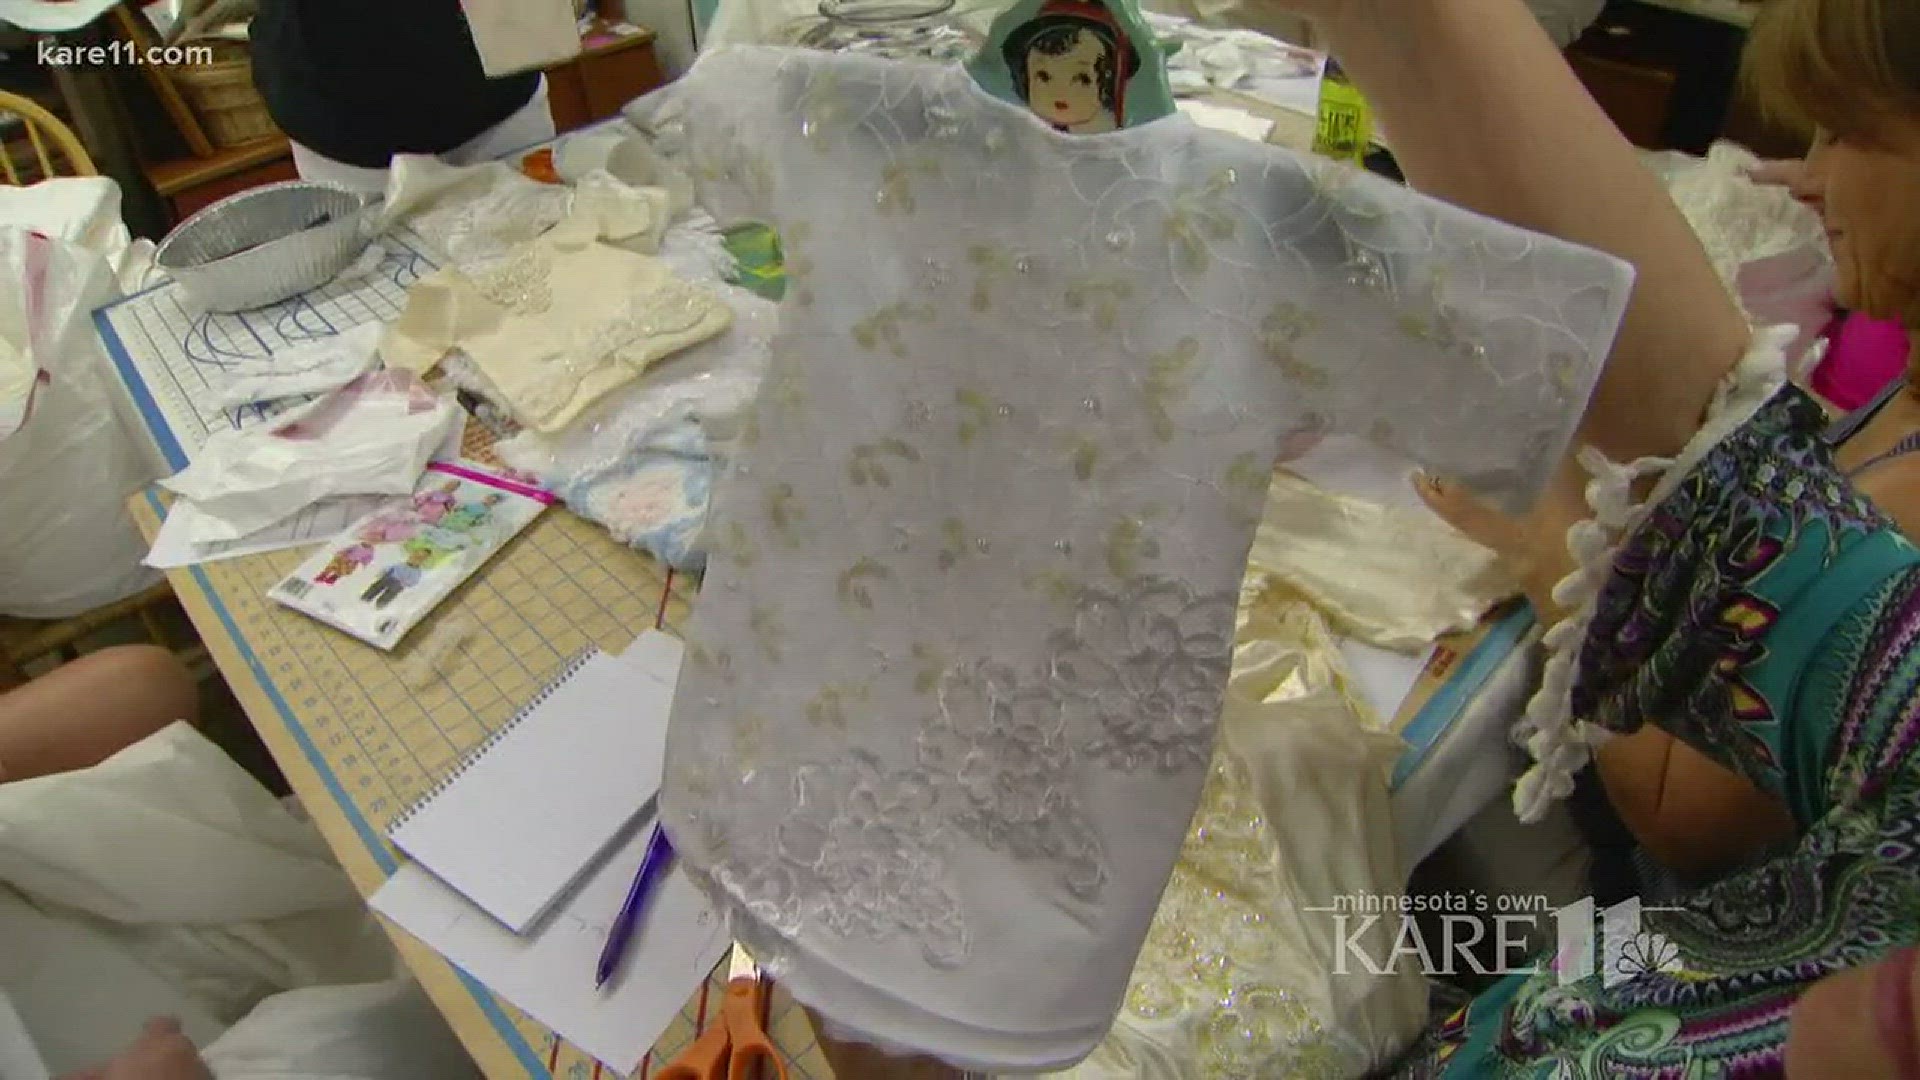 Old wedding gowns become burial outfits for babies who have died.